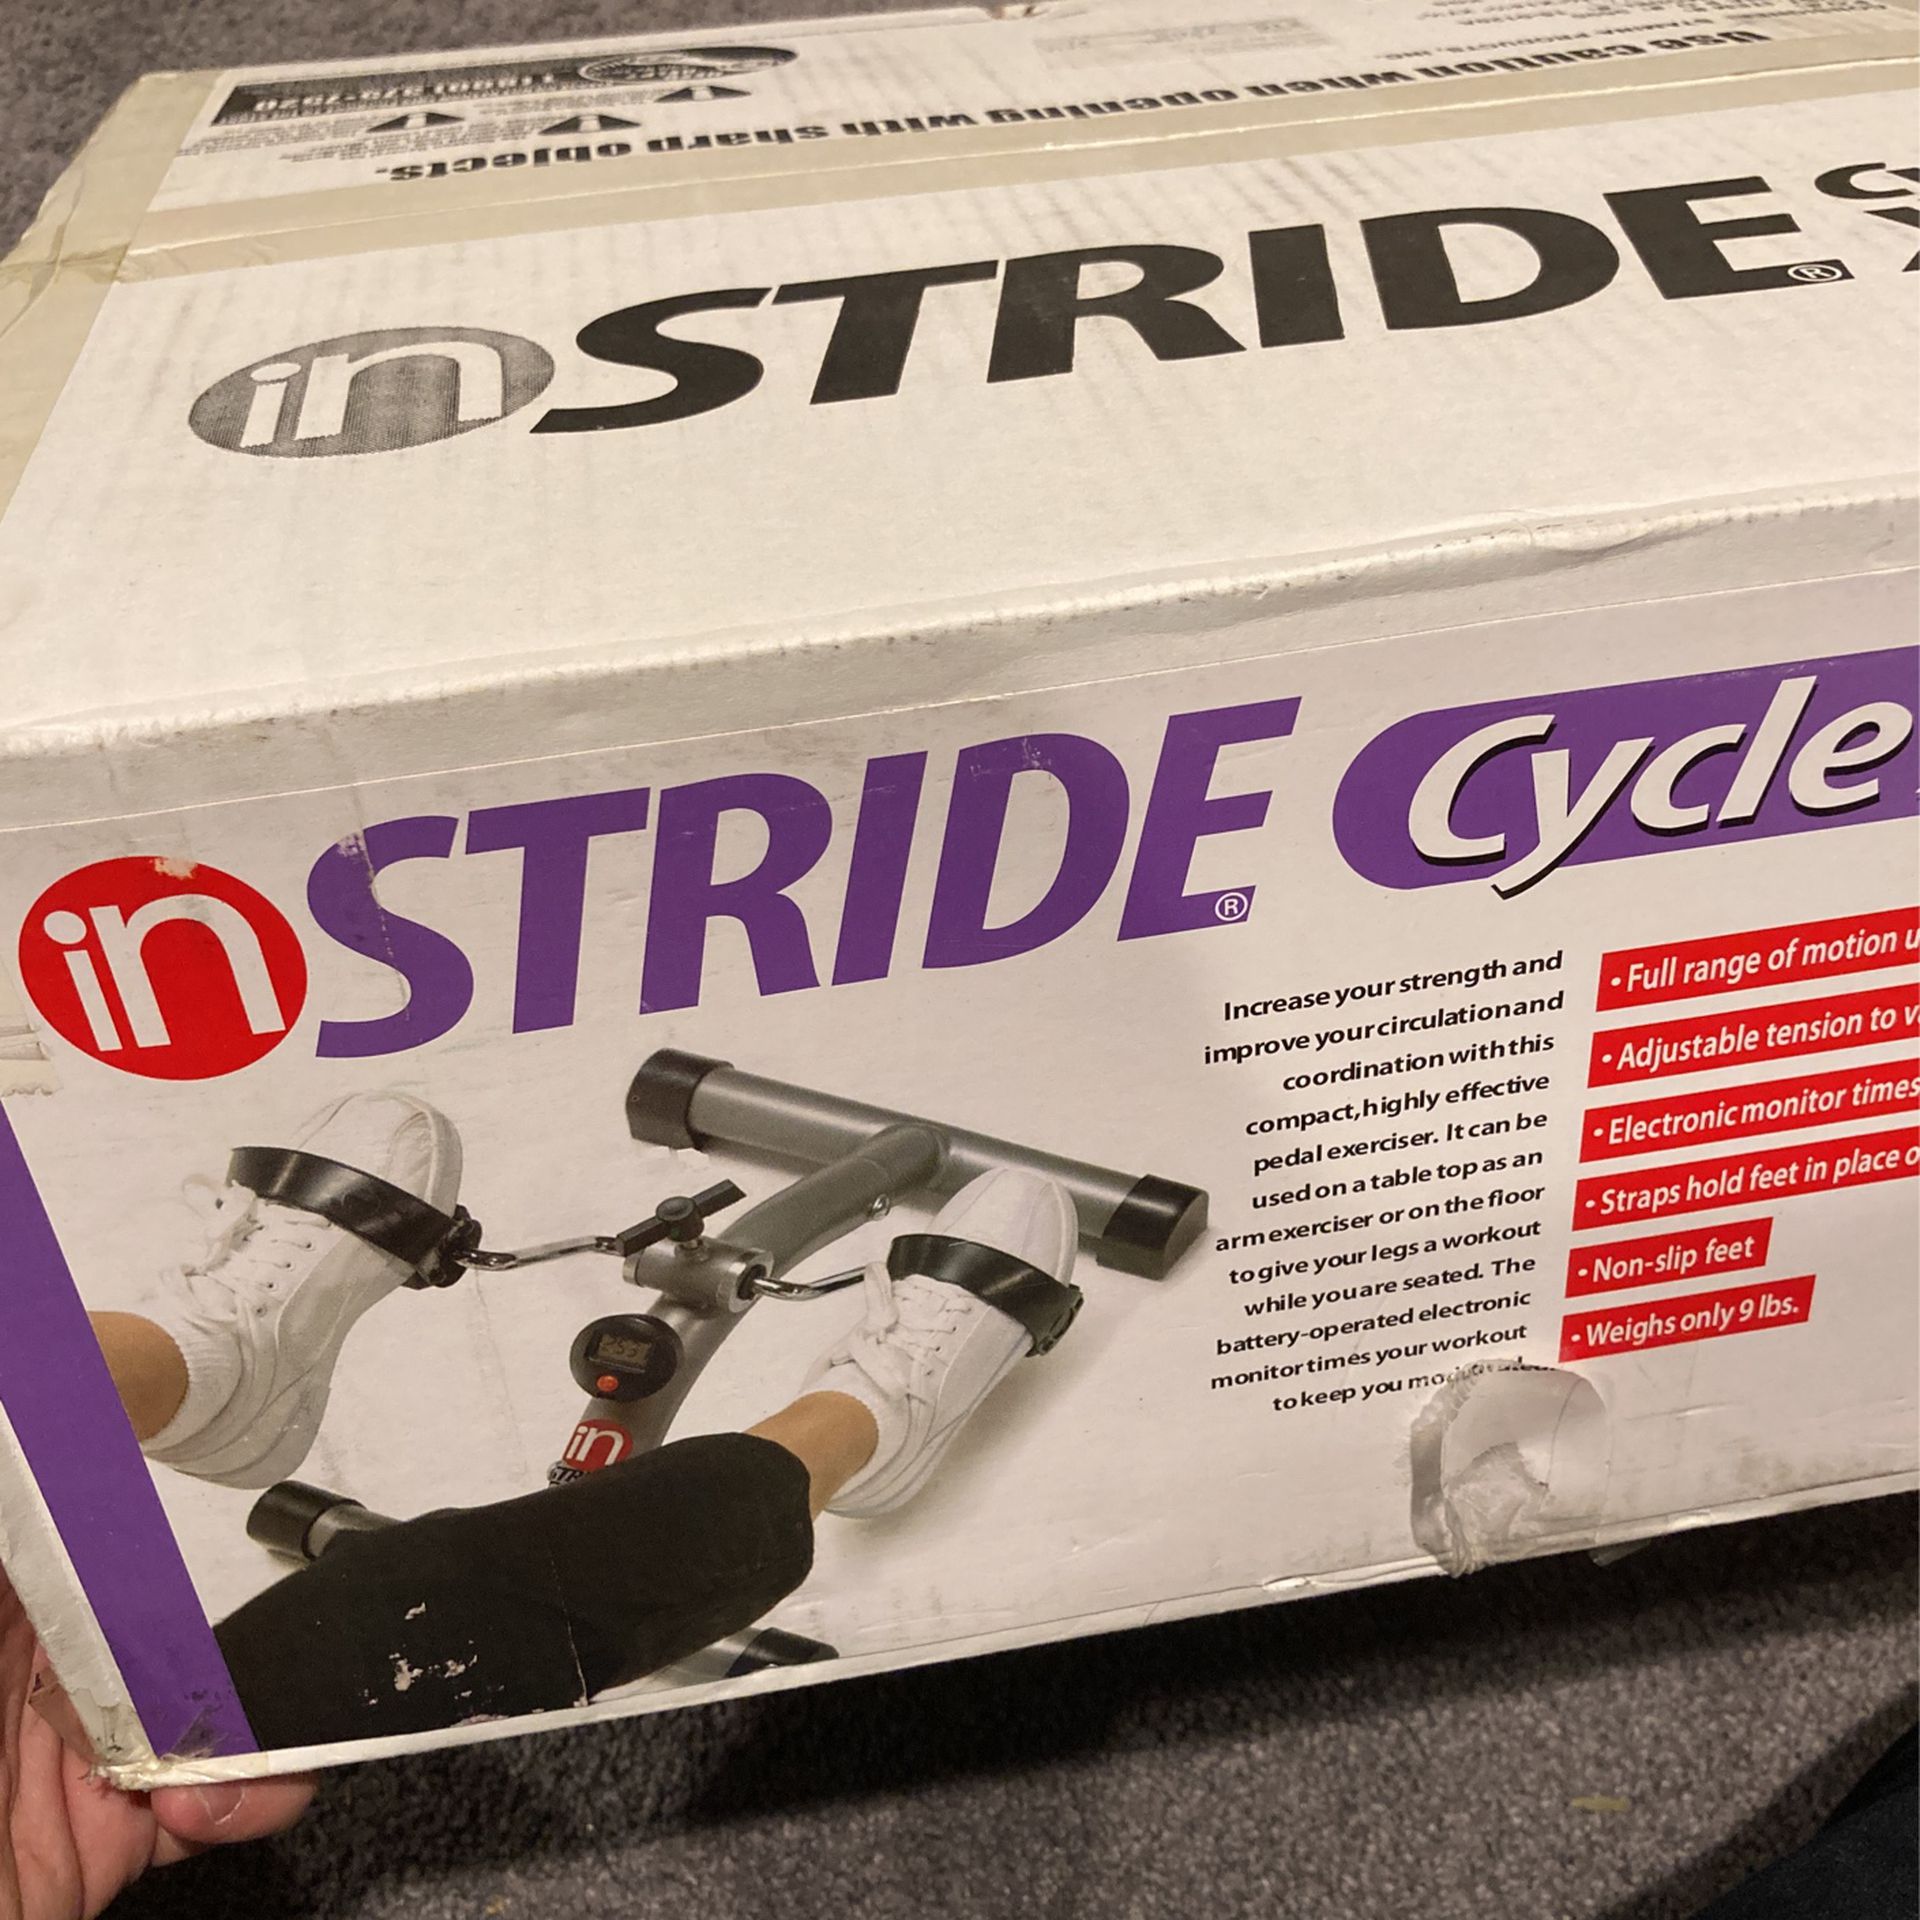 InStride Cycle XL Floor Pedal Exerciser 